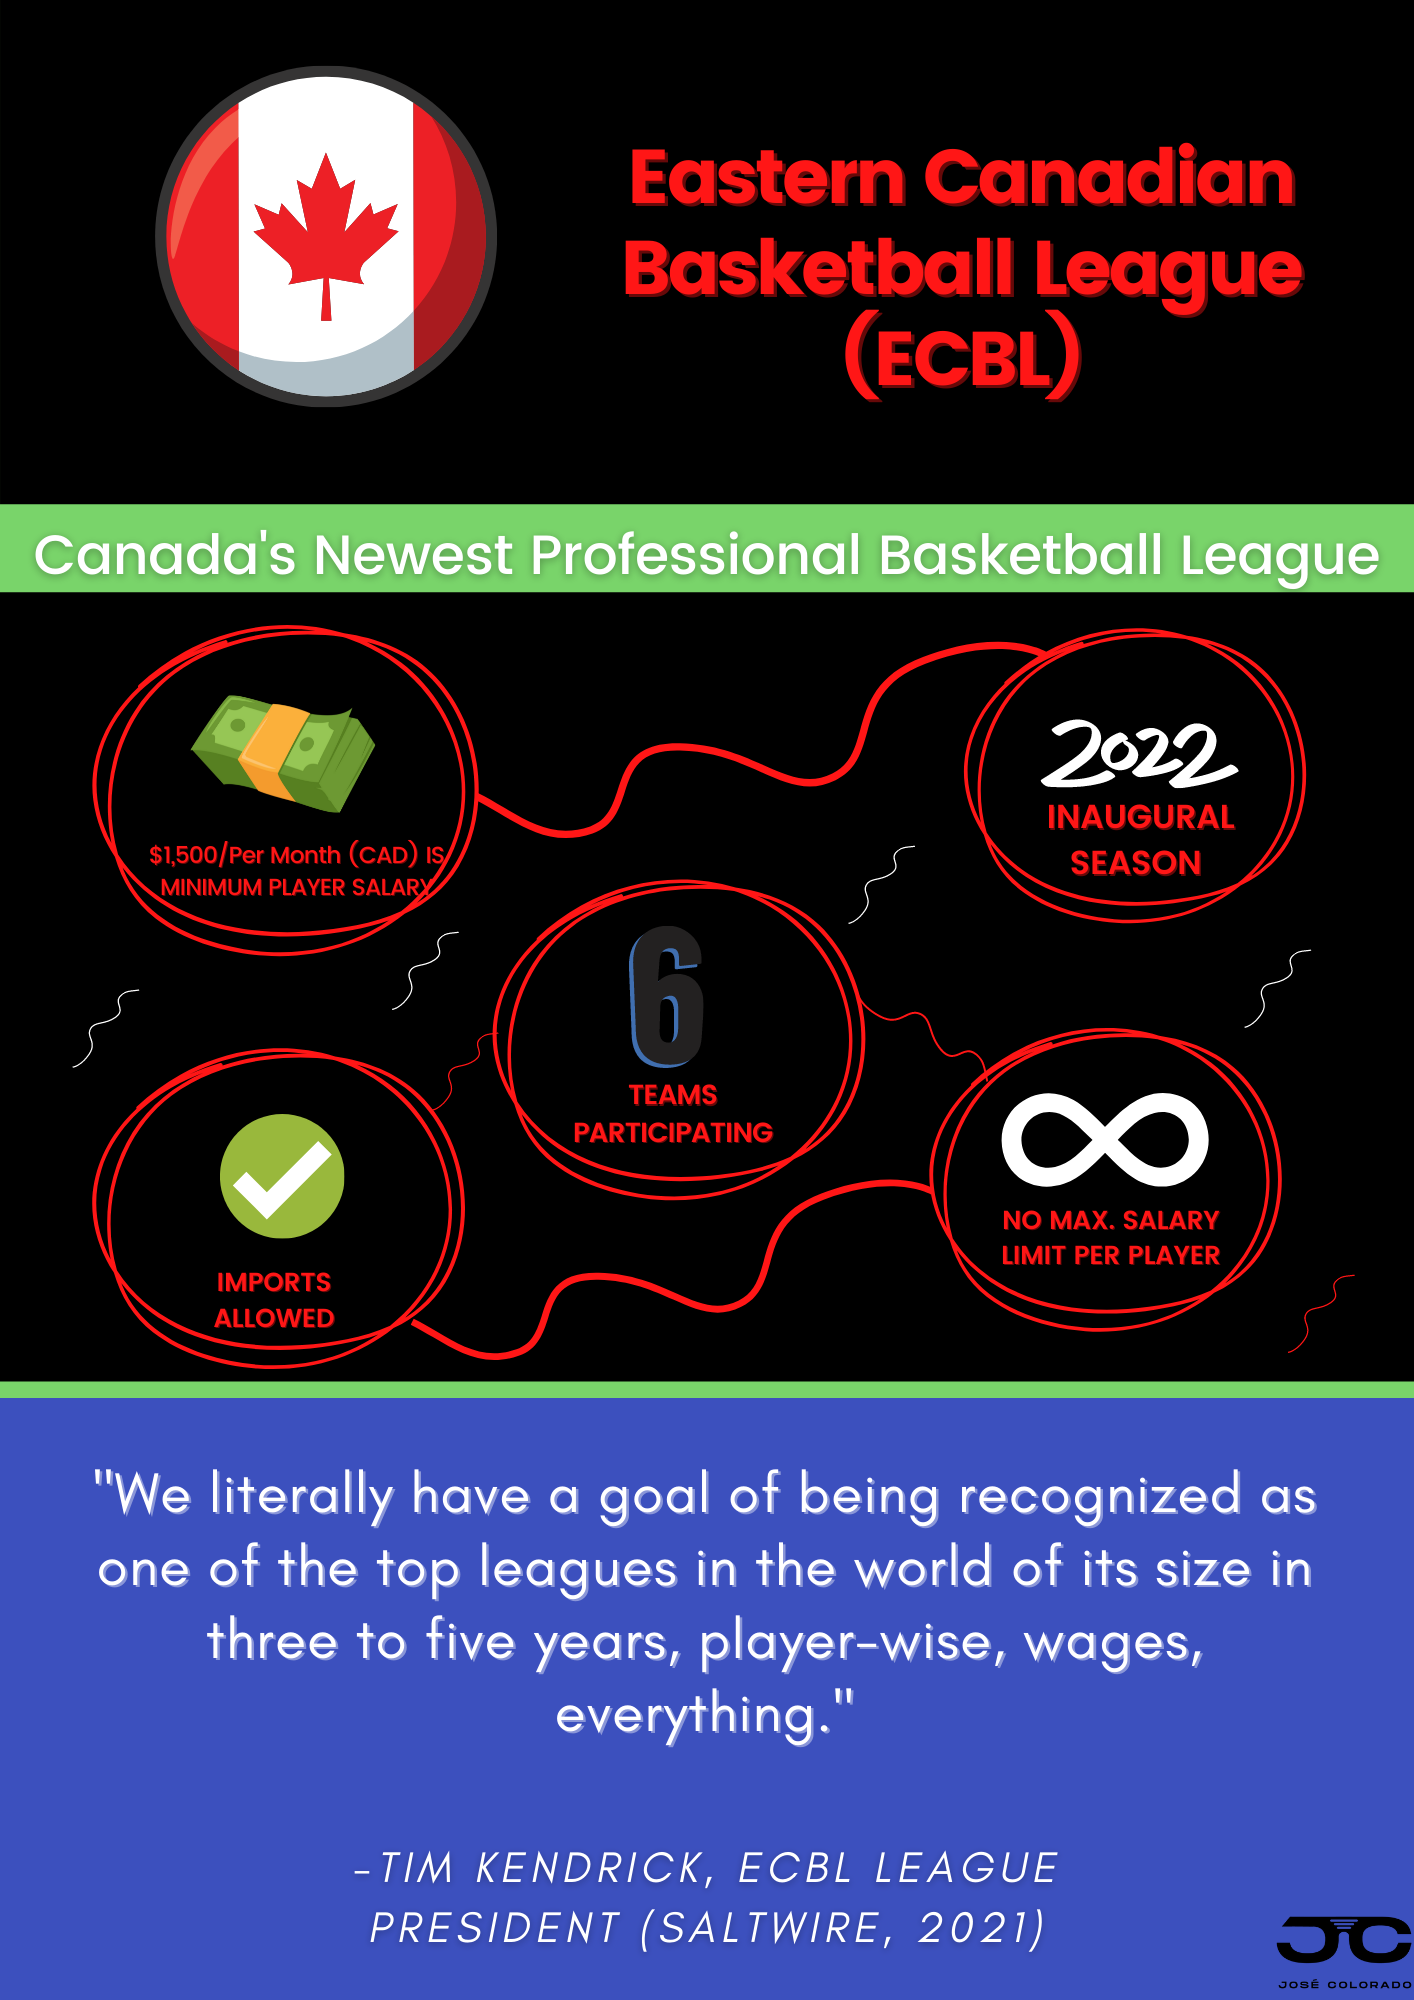 The Eastern Canadian Basketball League (ECBL) is a new professional basketball league for overseas players beginning in 2022.